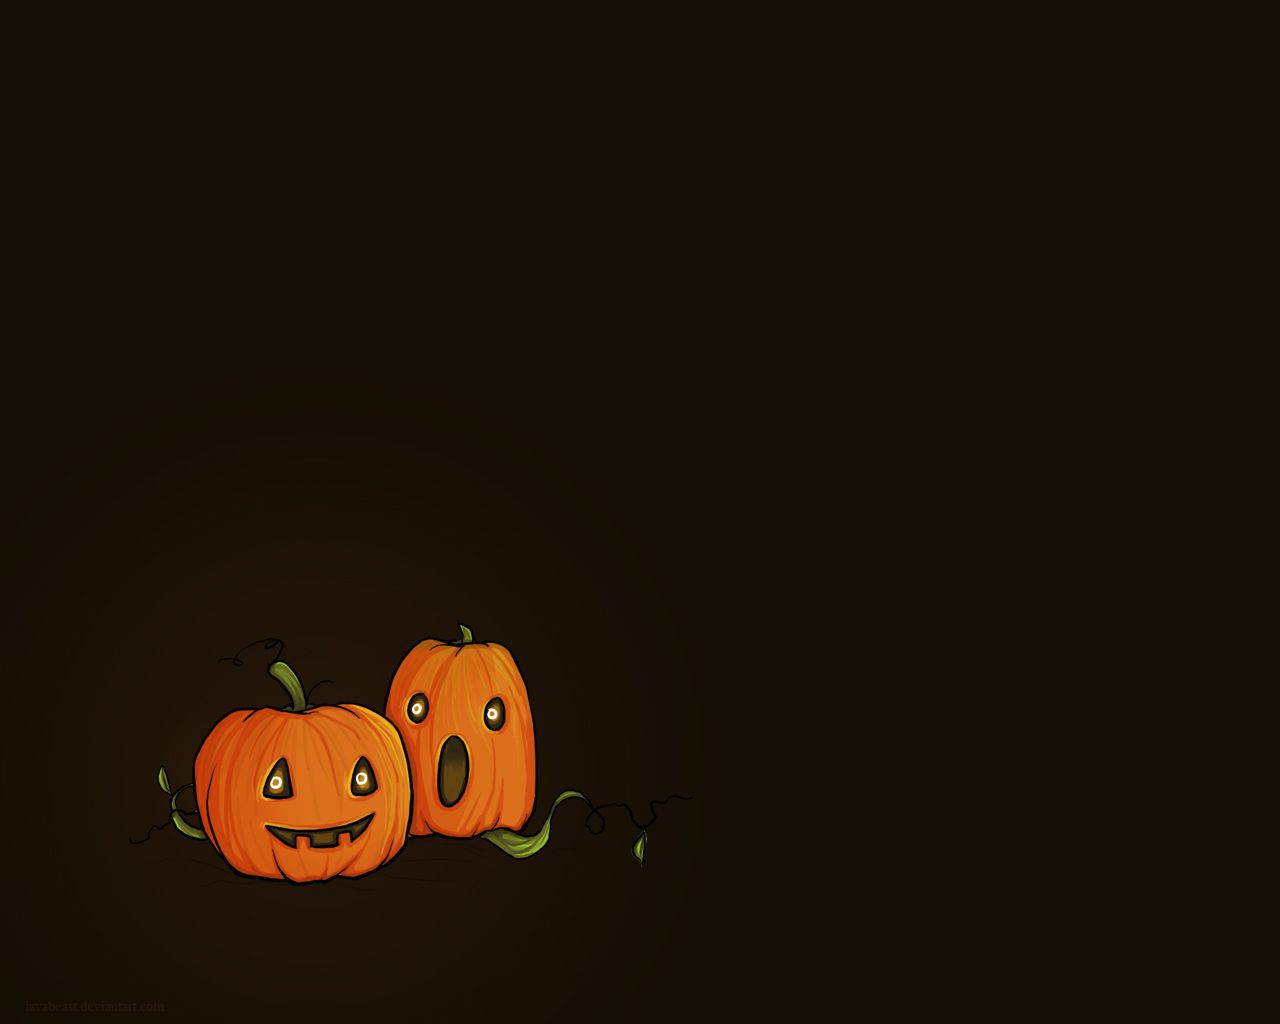 Scary Halloween 2012 HD Wallpaper. Pumpkins, Witches, Spider Web, Bats & Ghosts Collection